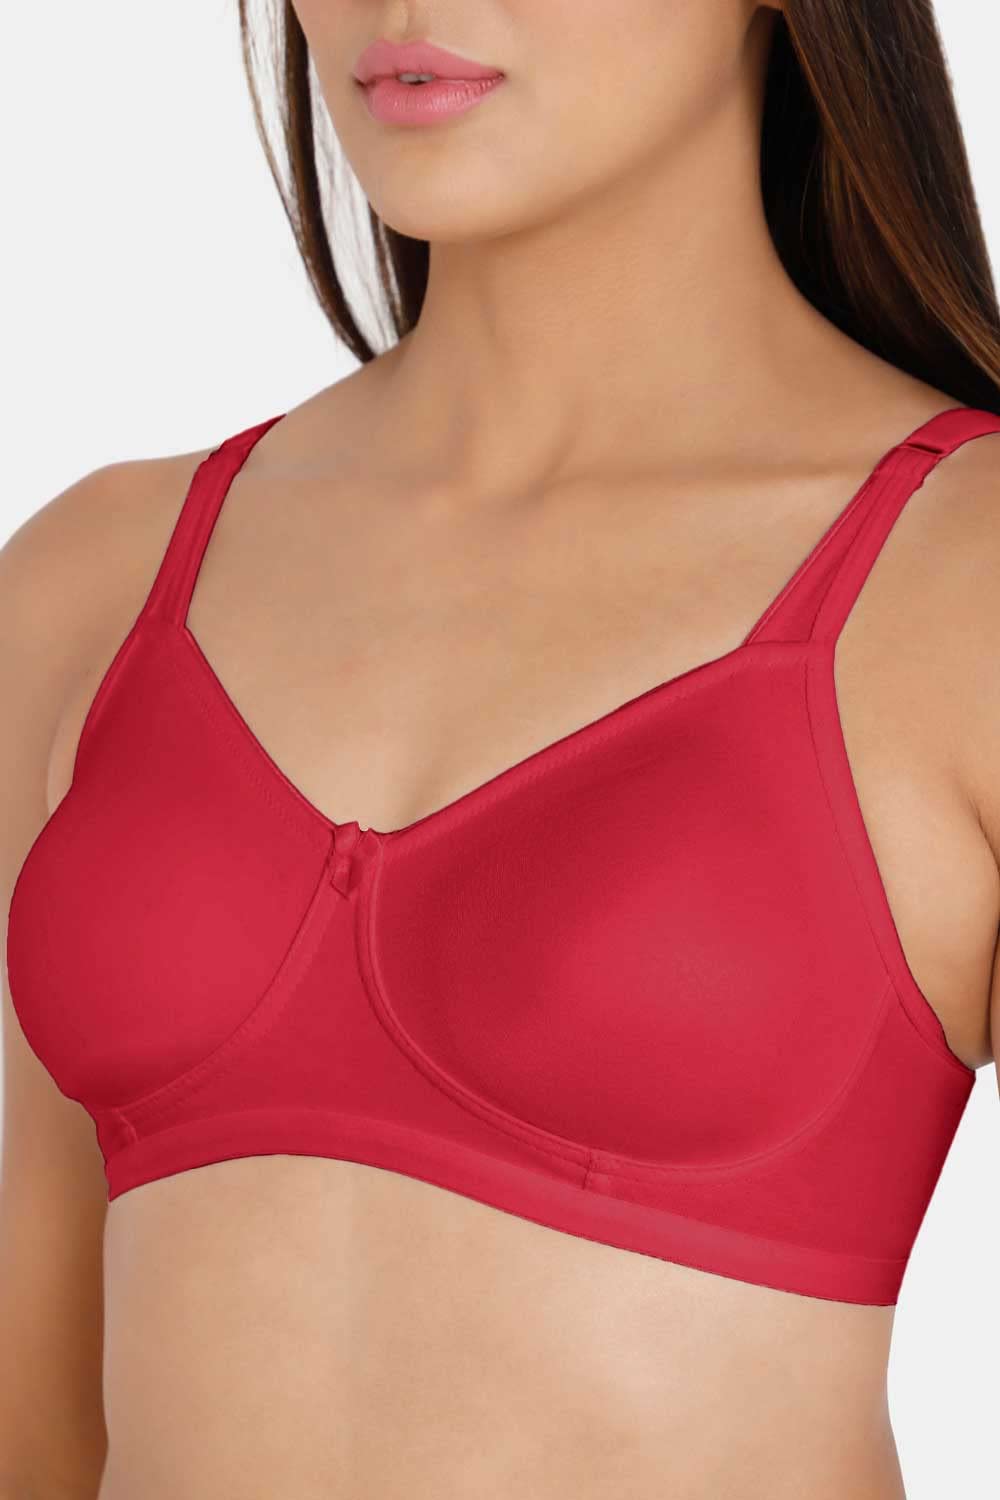 Intimacy Everyday-Bra Special Combo Pack - ES21 - C44